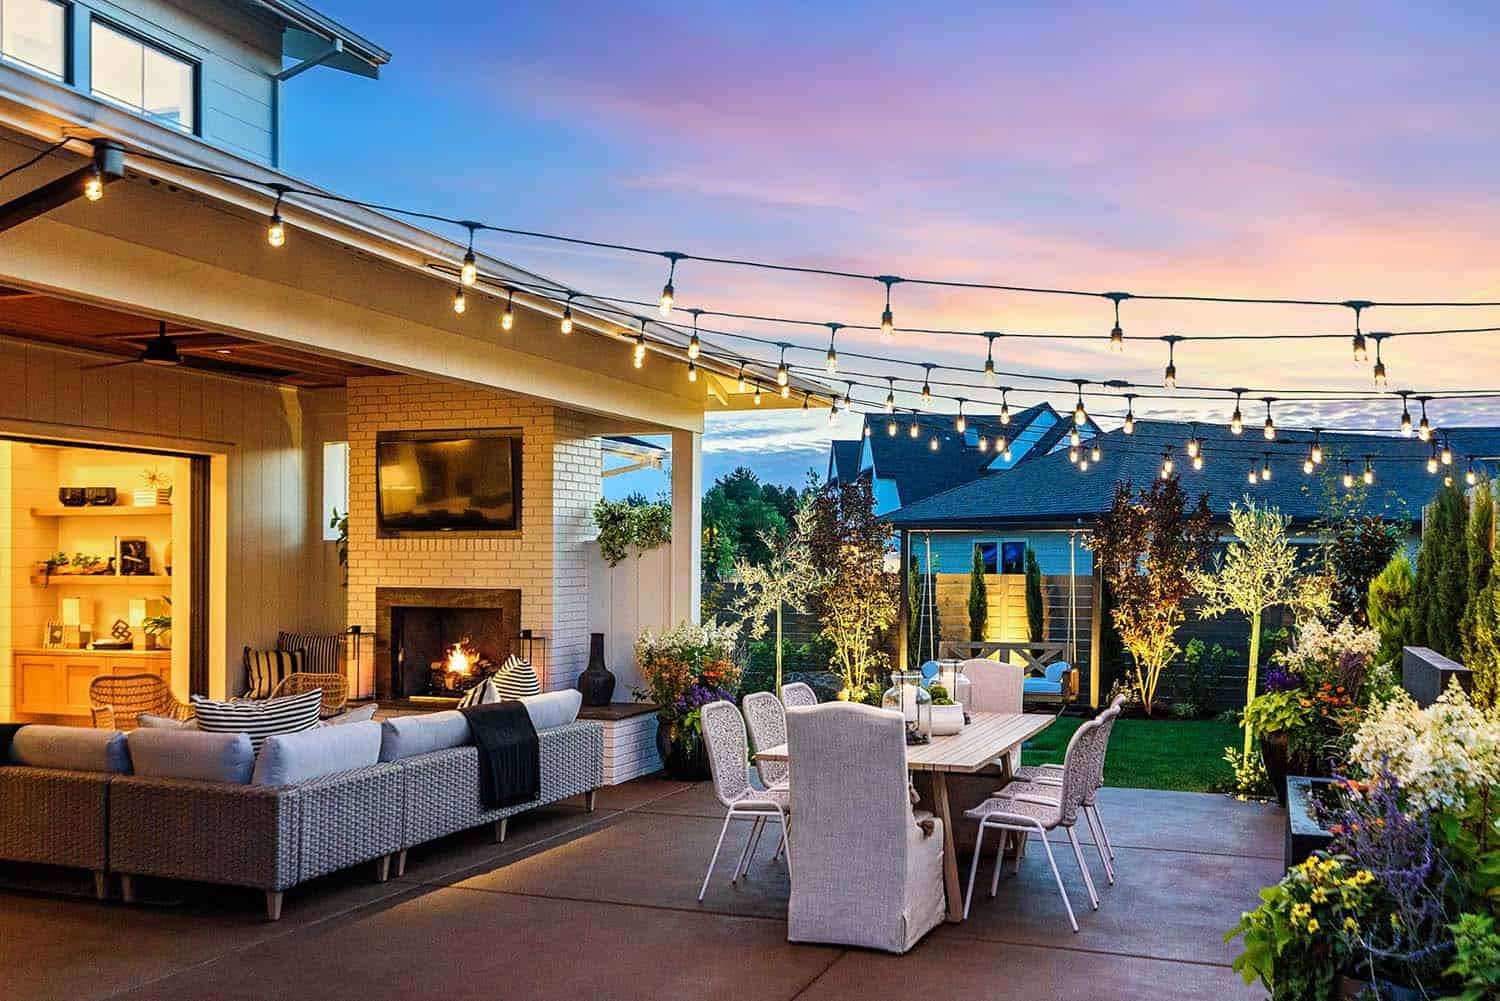 backyard-patio-with-outdoor-dining-and-string-lights